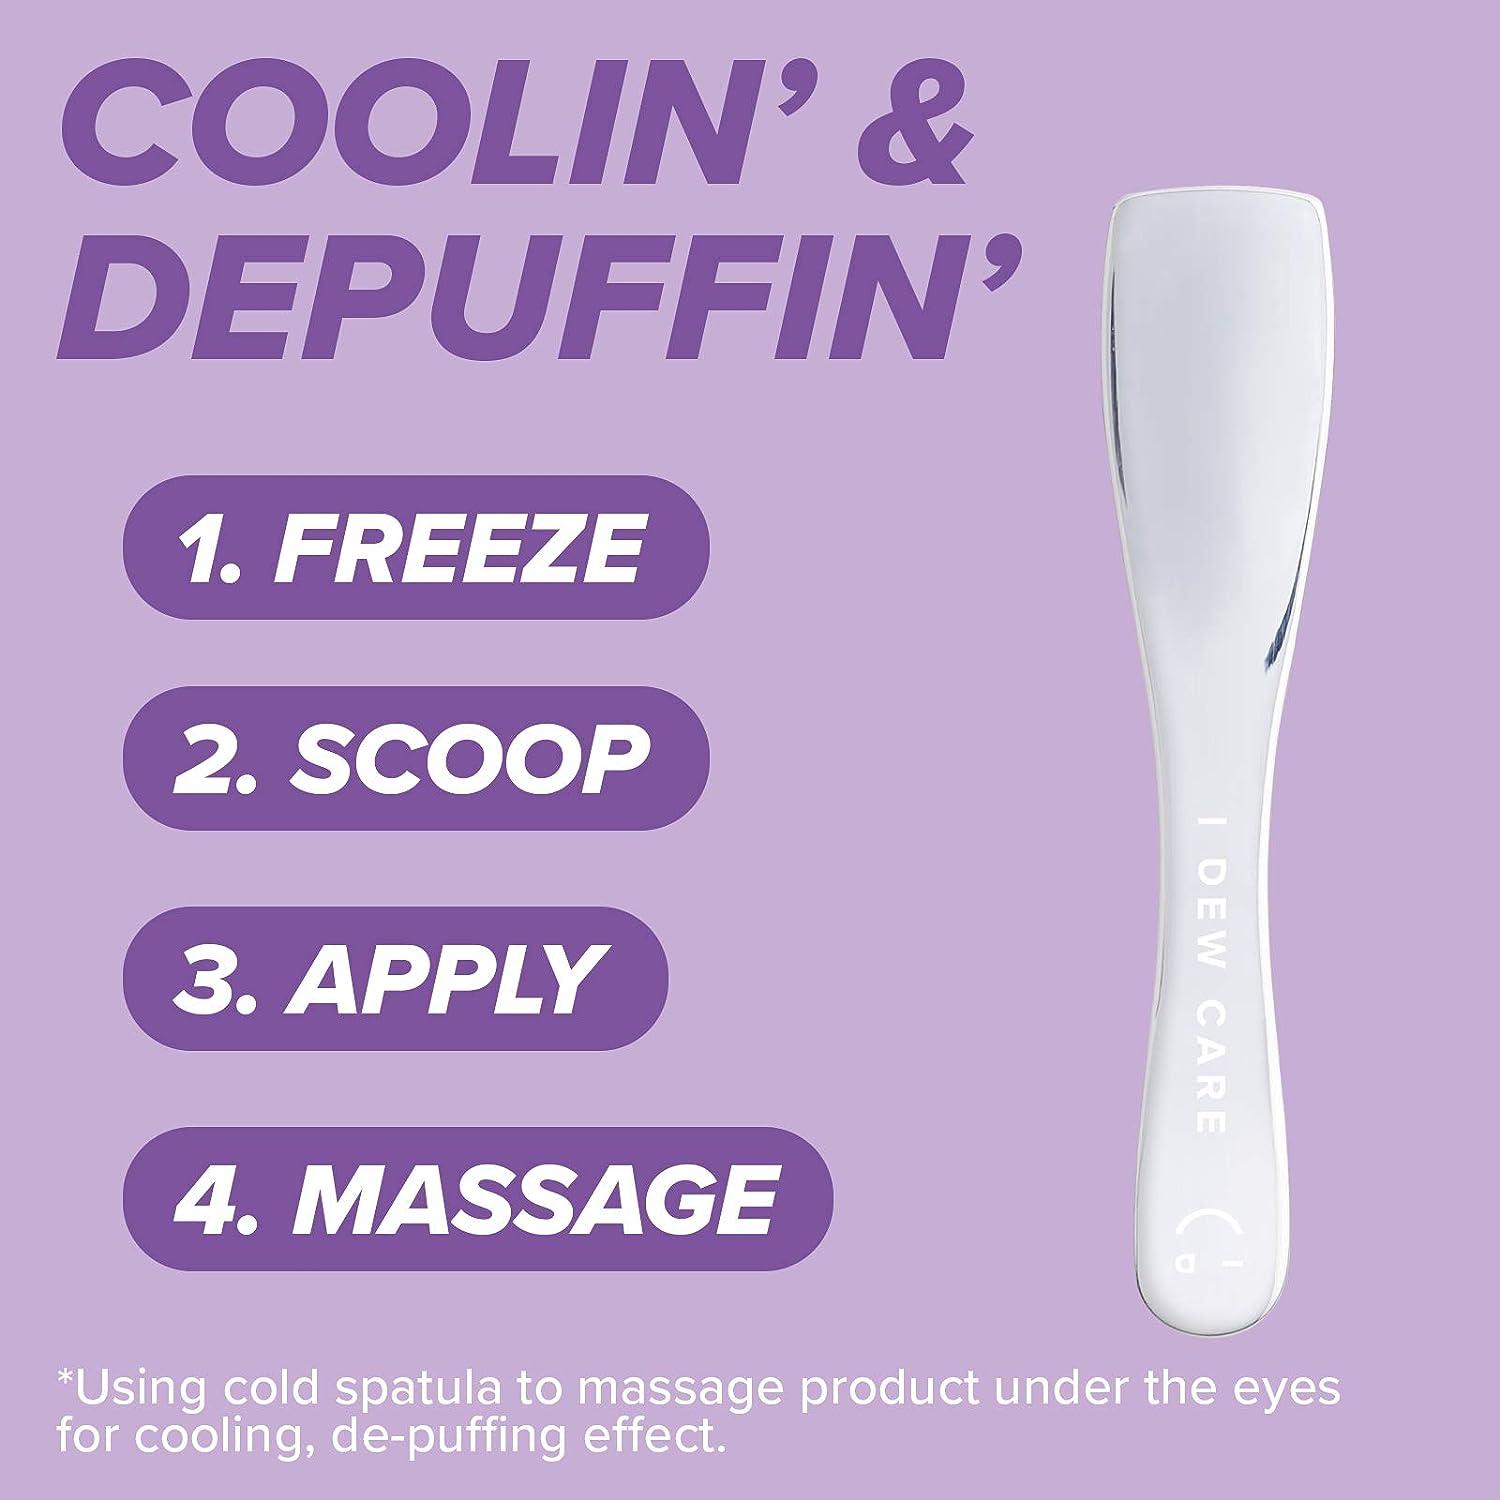 I Dew Care Multi-functional Applicator - Get The Scoop  Gift, Stainless  Steel Spatula, Beauty Tool for Cream, Lip Balm, Wash-Off Masks, Mixing,  Depuffing